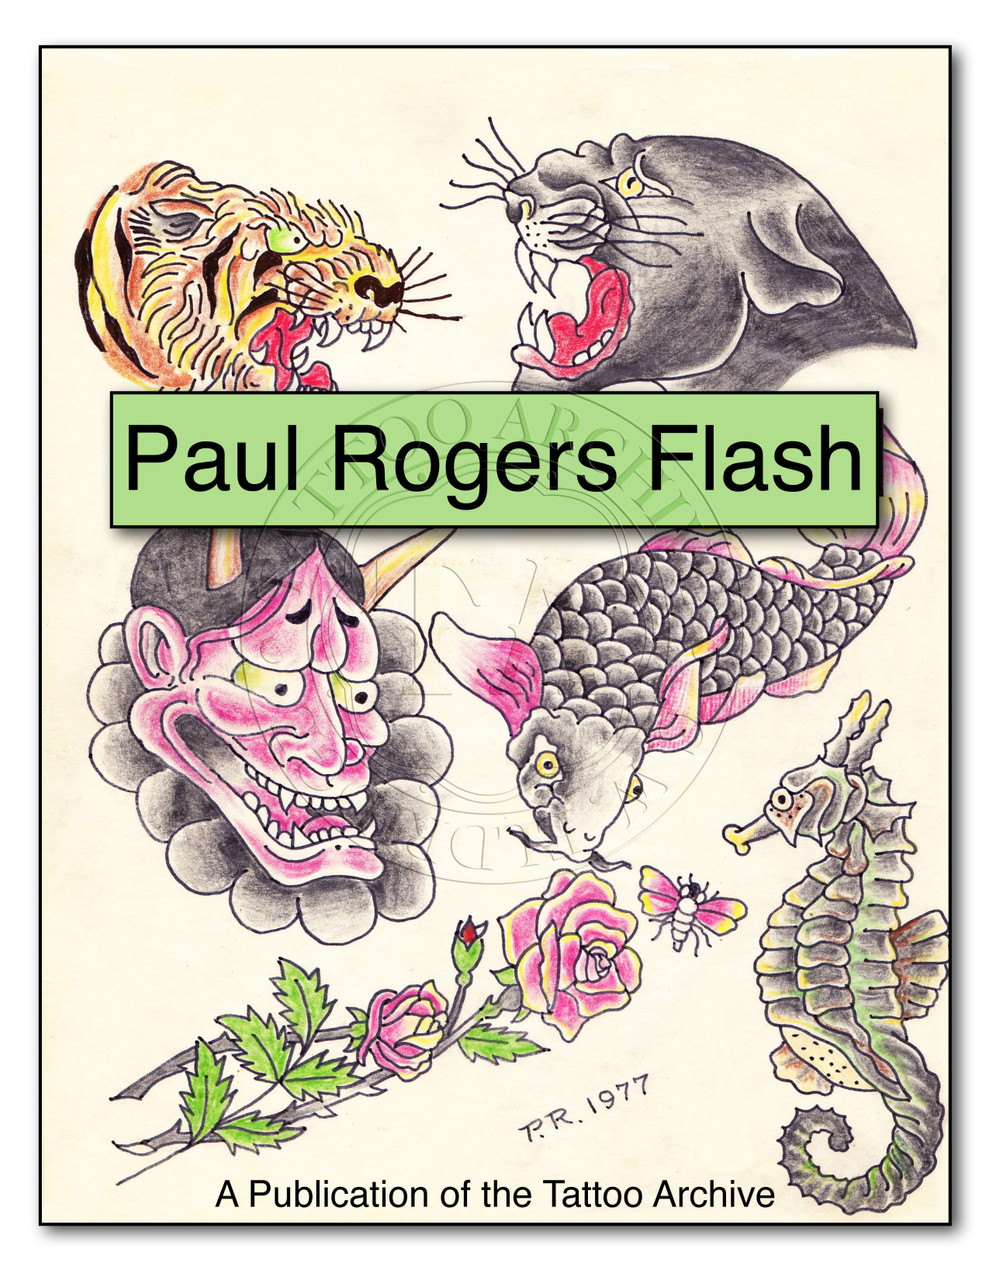 Vintage Tattoo Flash From the Silver Screen  Shop Illustrated Books  eBooks and Prints